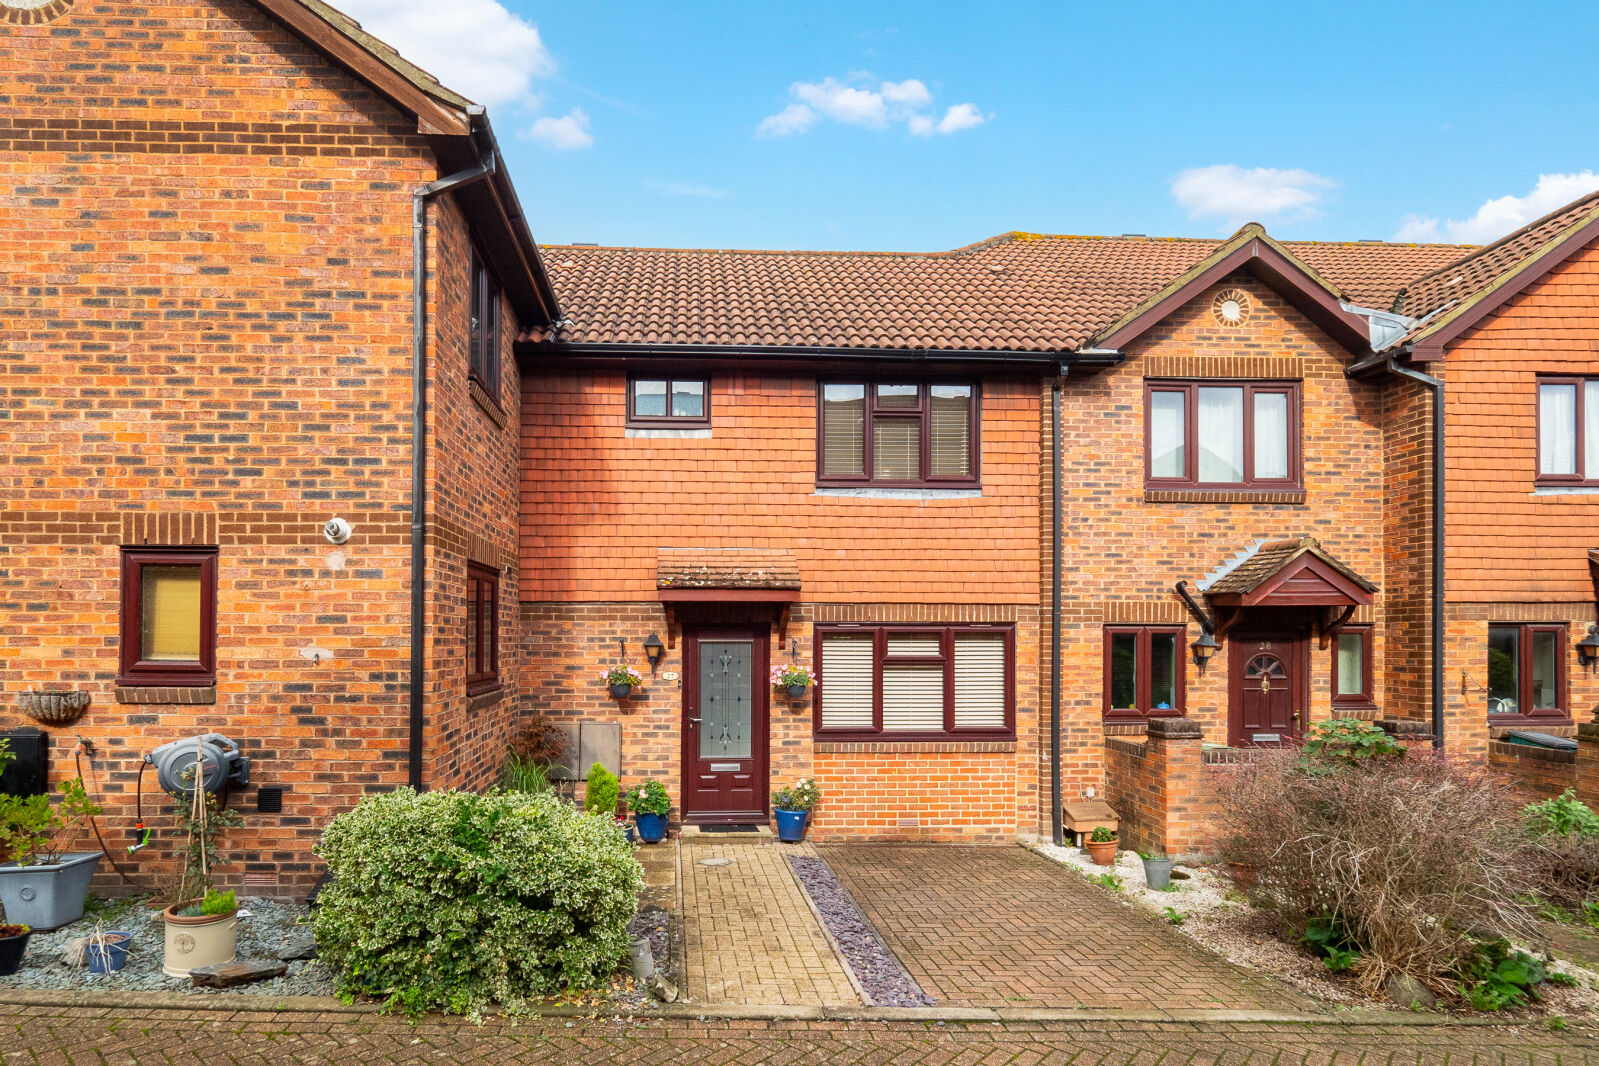 2 bedroom mid terraced house for sale Alpine View, Carshalton, SM5, main image